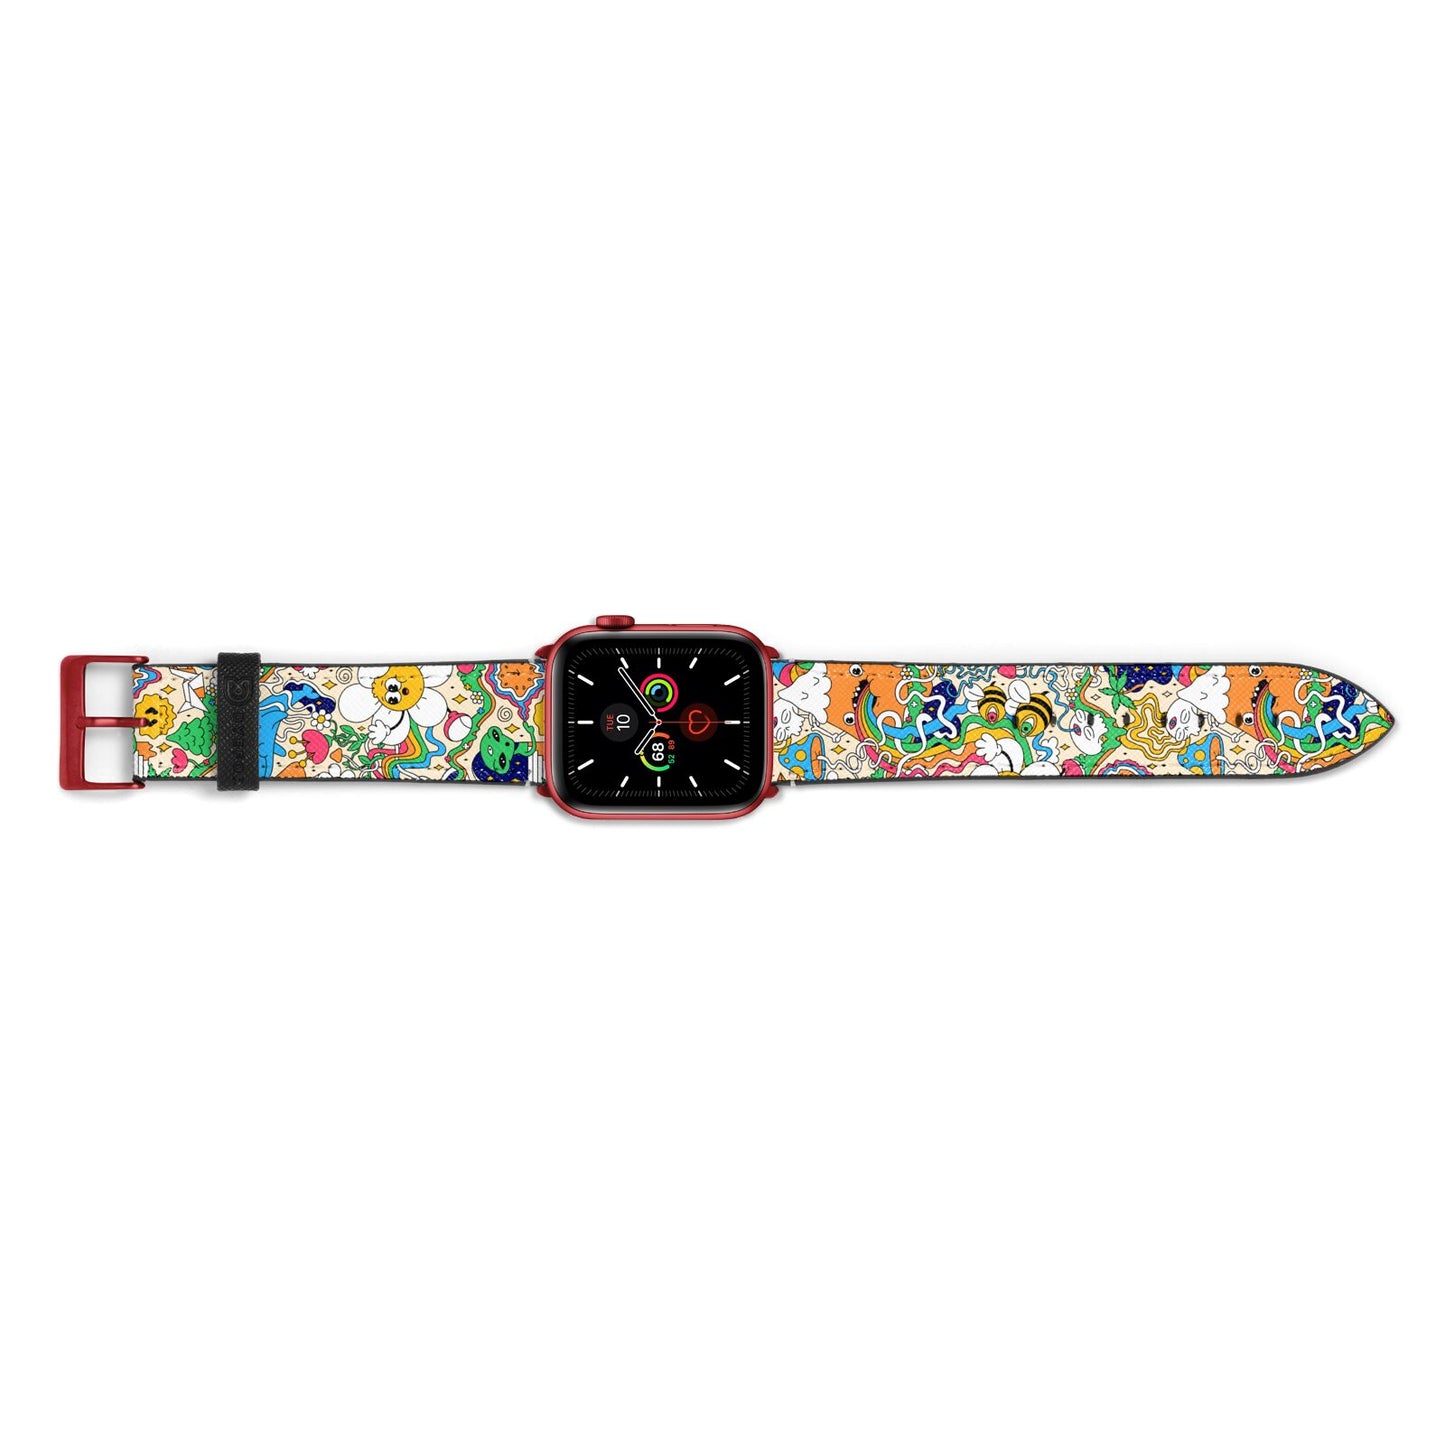 Psychedelic Trippy Apple Watch Strap Landscape Image Red Hardware